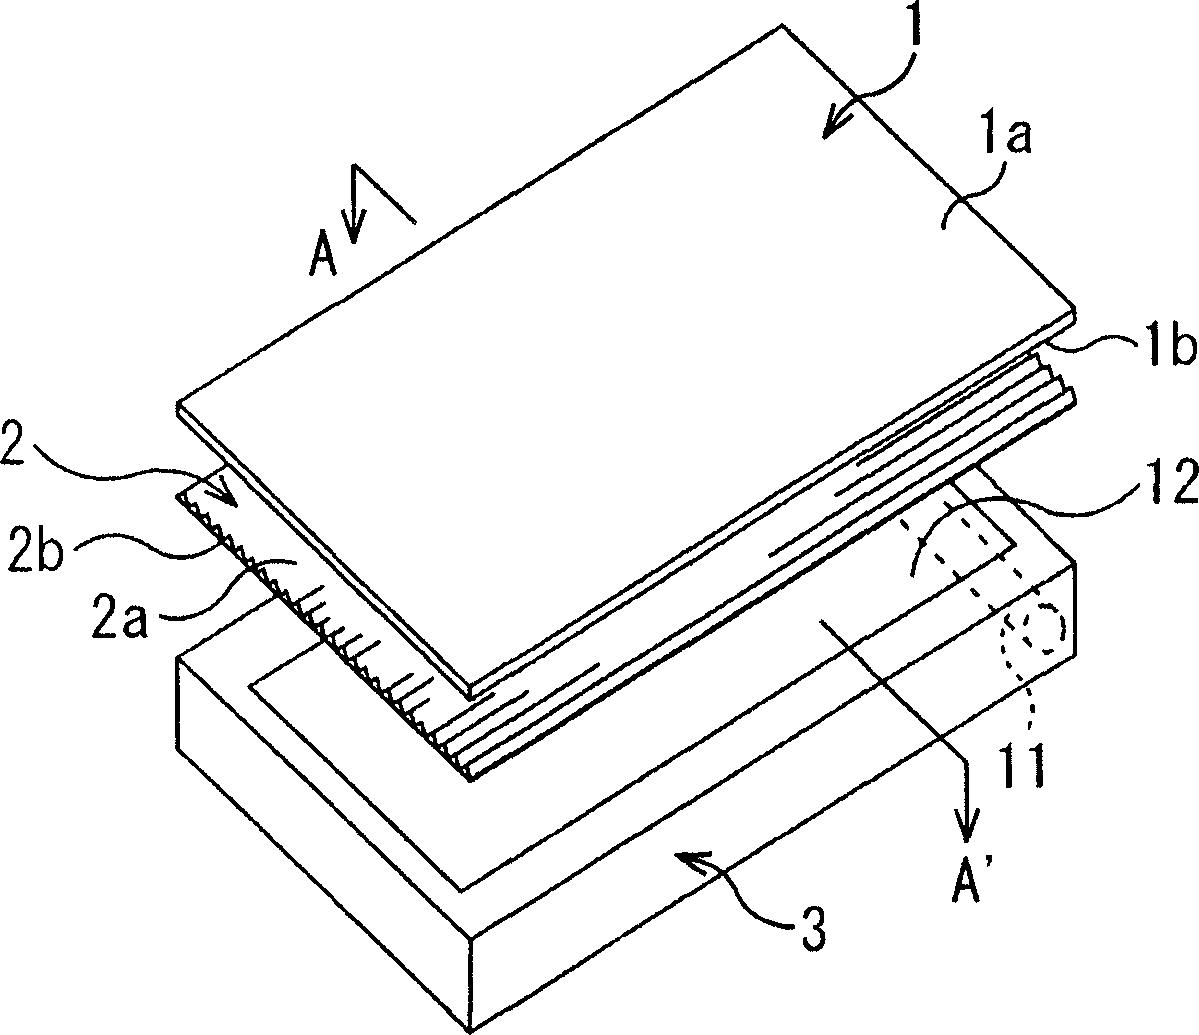 Back light, light guiding plate, method for manufacturing diffusion plate and light guiding plate, and liquid crystal display device